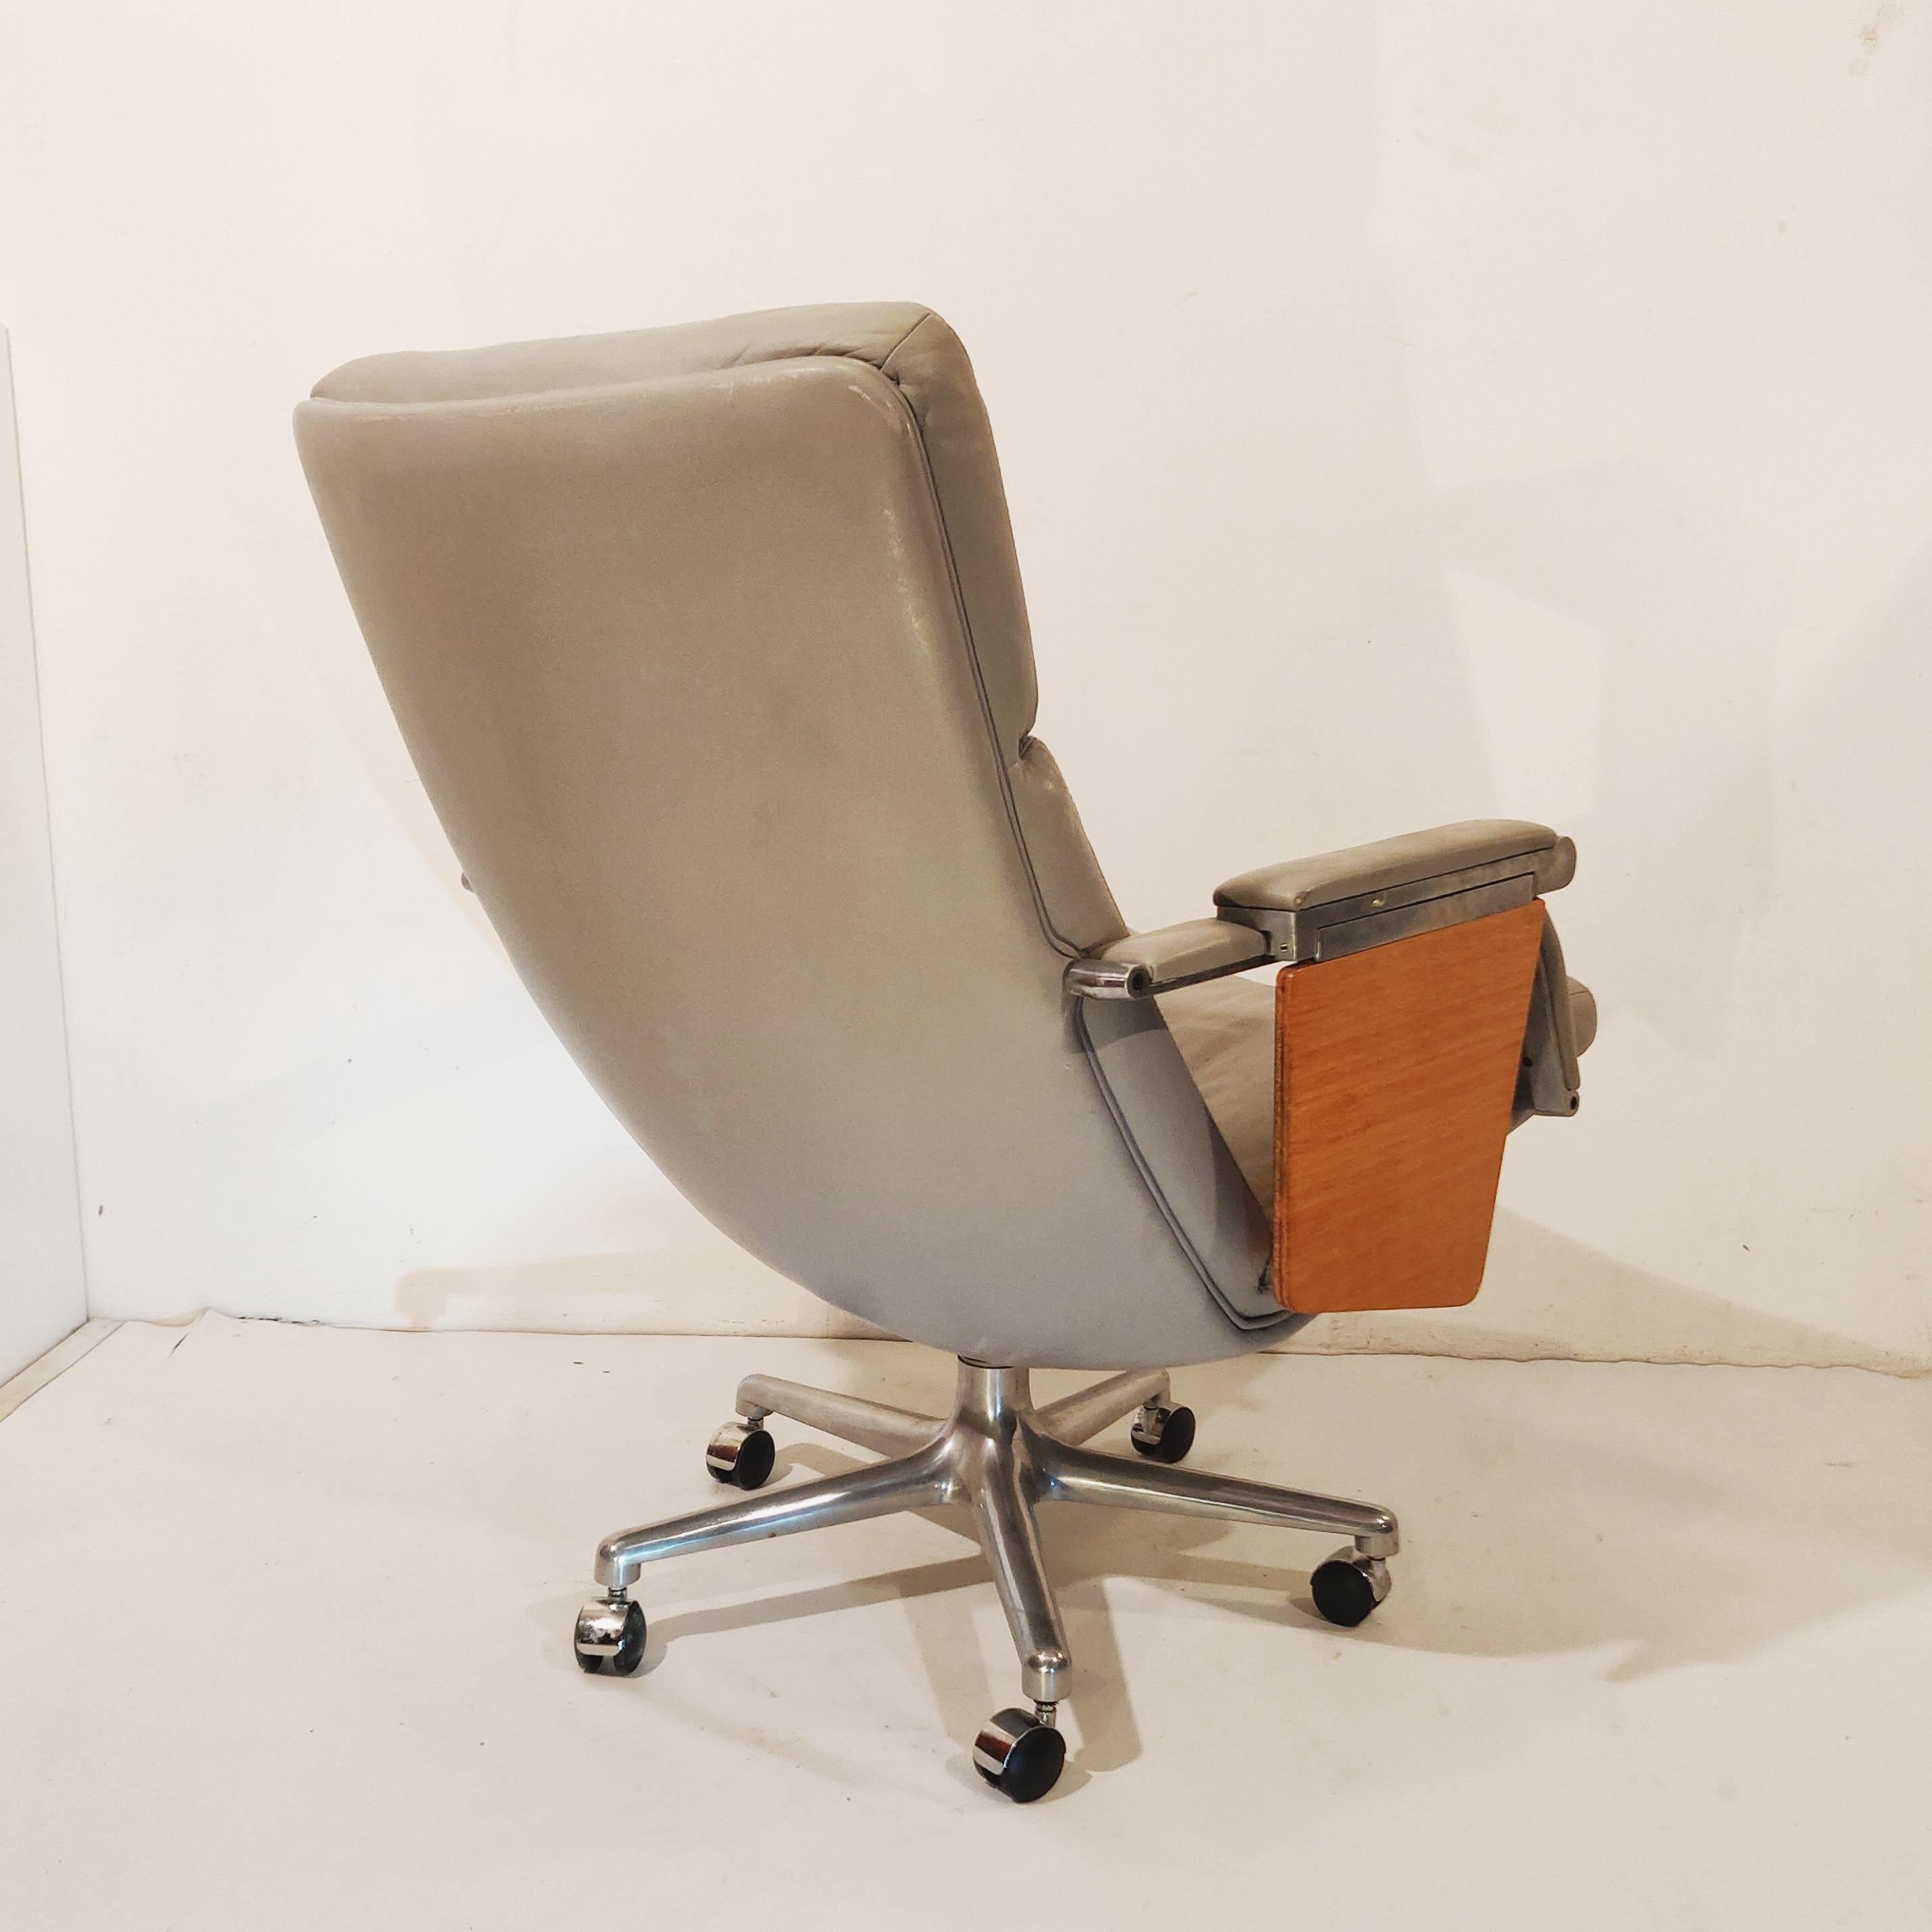 Mid-20th Century Leather Swivel Chair with Wooden Writing Board by Geoffrey Harcourt, 1970s For Sale